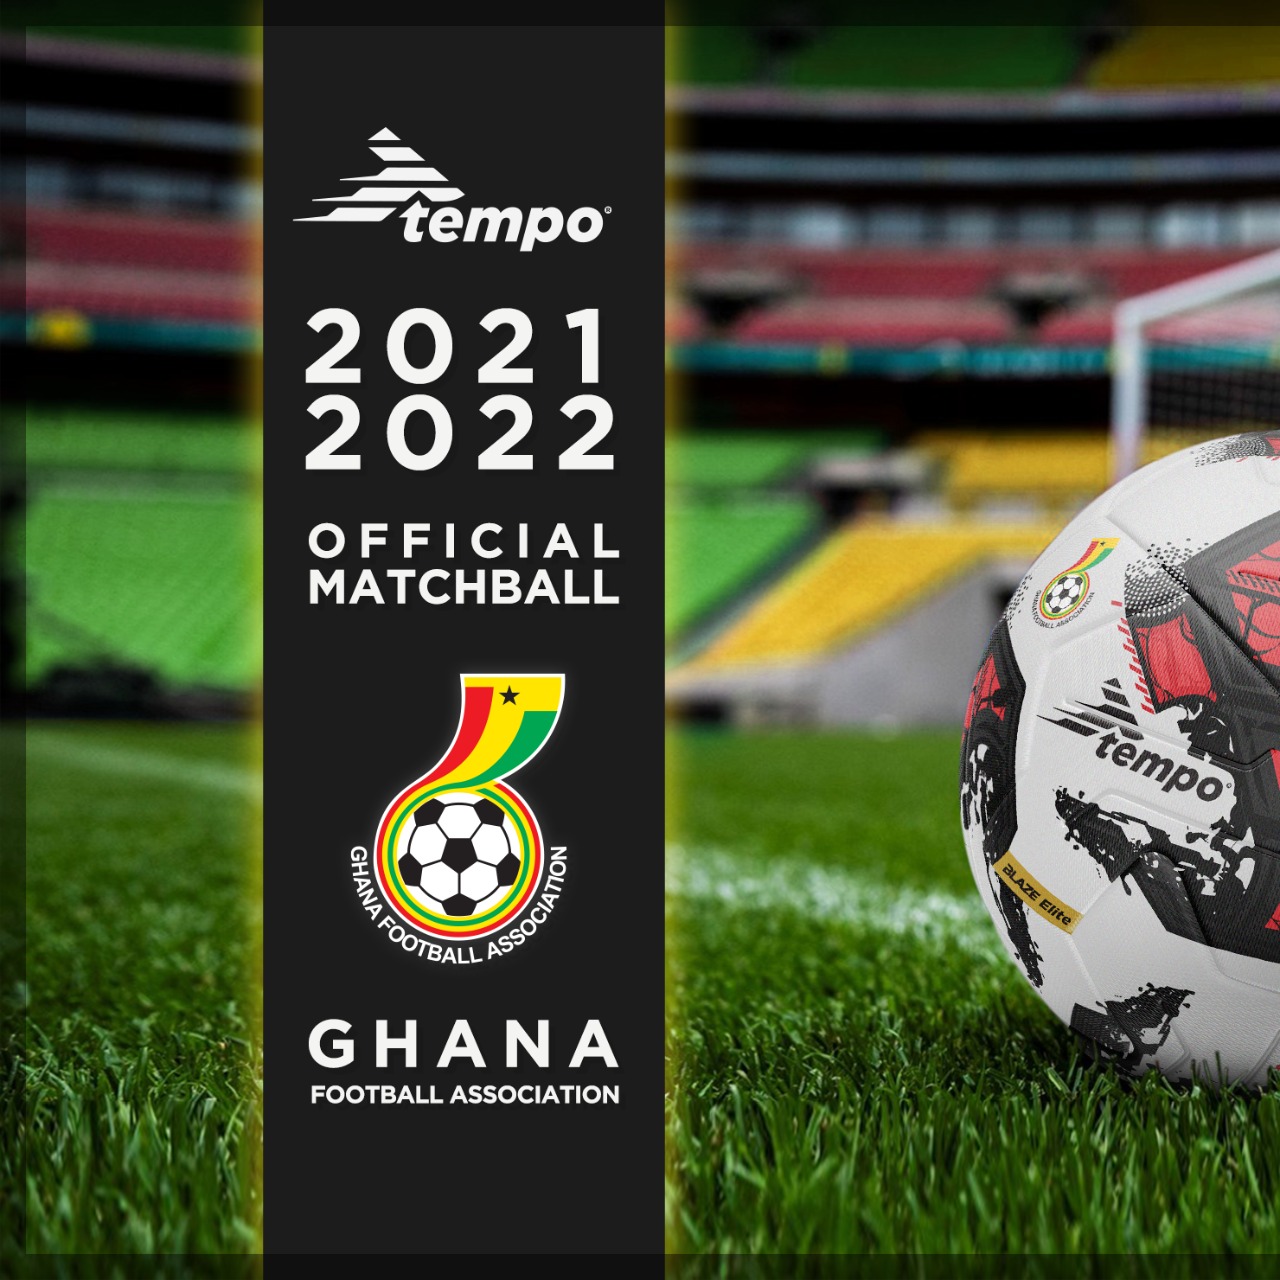 Tempo is official match ball for the Premier League